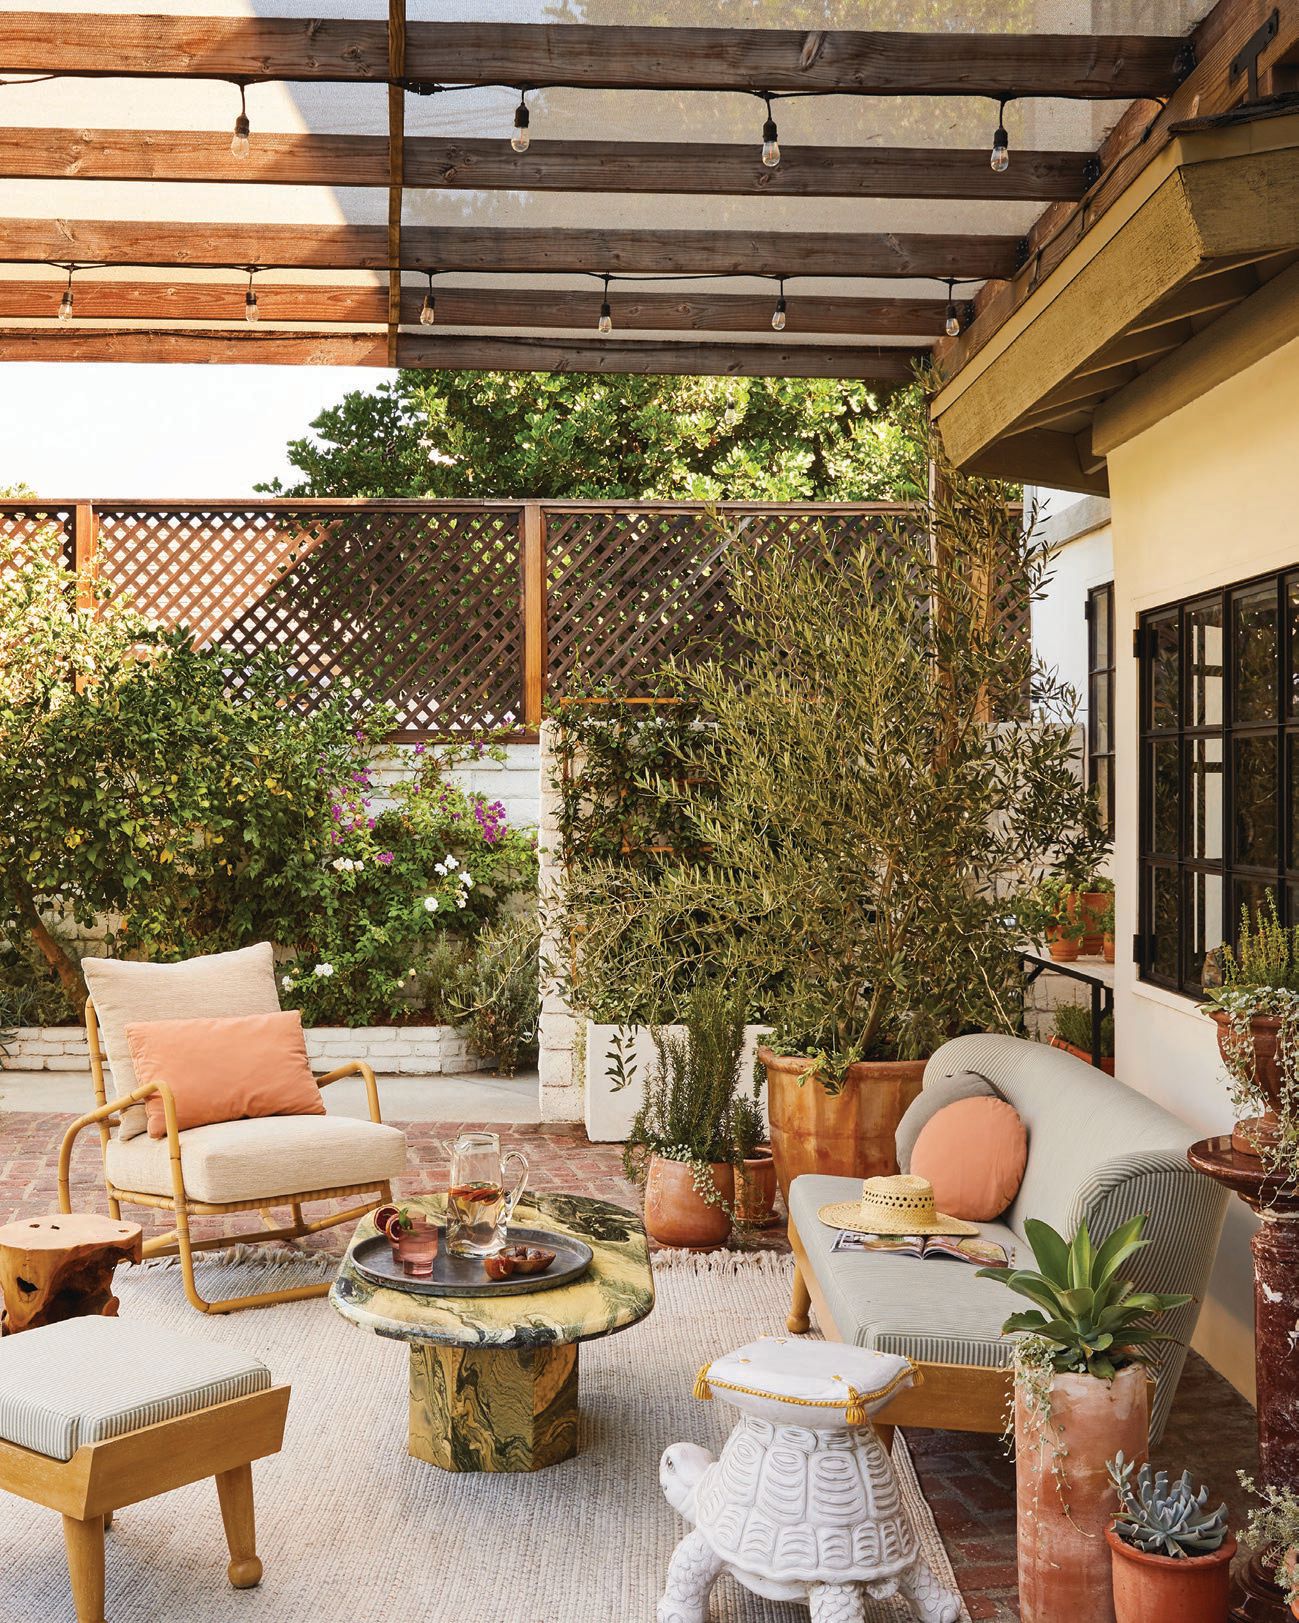 The patio contains a mix of new and vintage pieces, including a sofa and ottoman from August Abode’s Hayworth Collection, a vintage Italian marble coffee table from the 1960s found at Castle Antiques & Design and a vintage terra-cotta turtle garden stool from Van den Andern found on 1stDibs. Photographed By Sam Frost